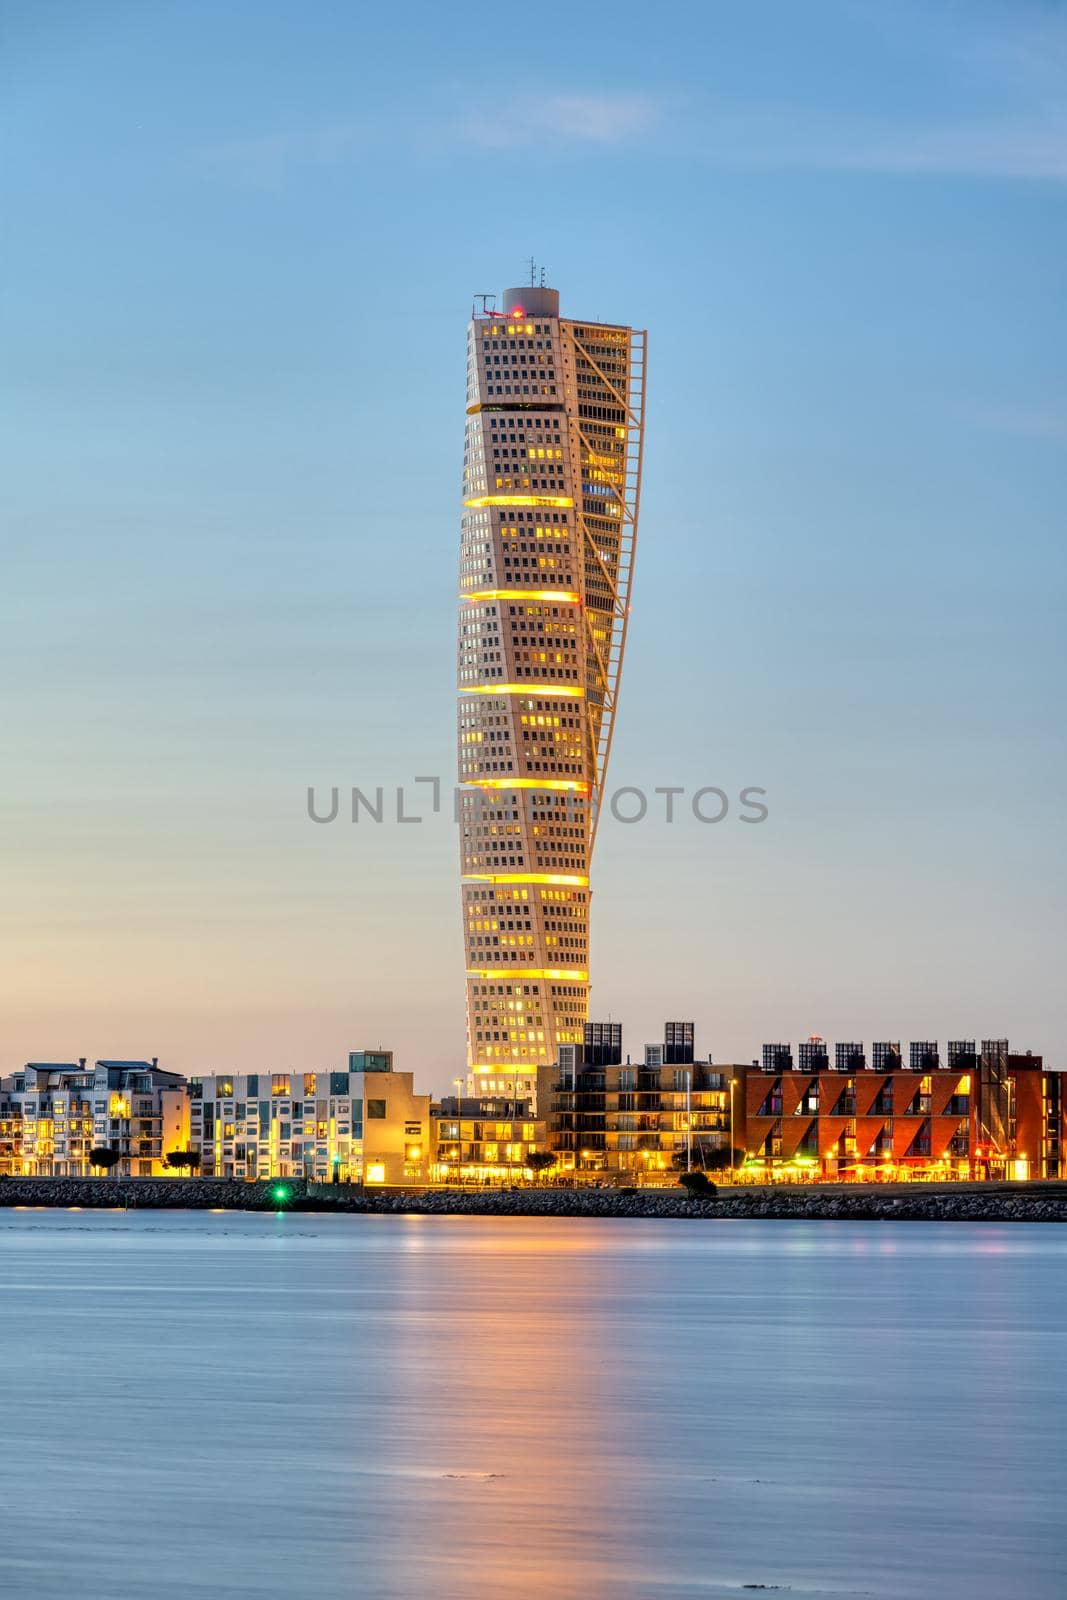 The iconic Turning Torso in in Malmo, Sweden by elxeneize